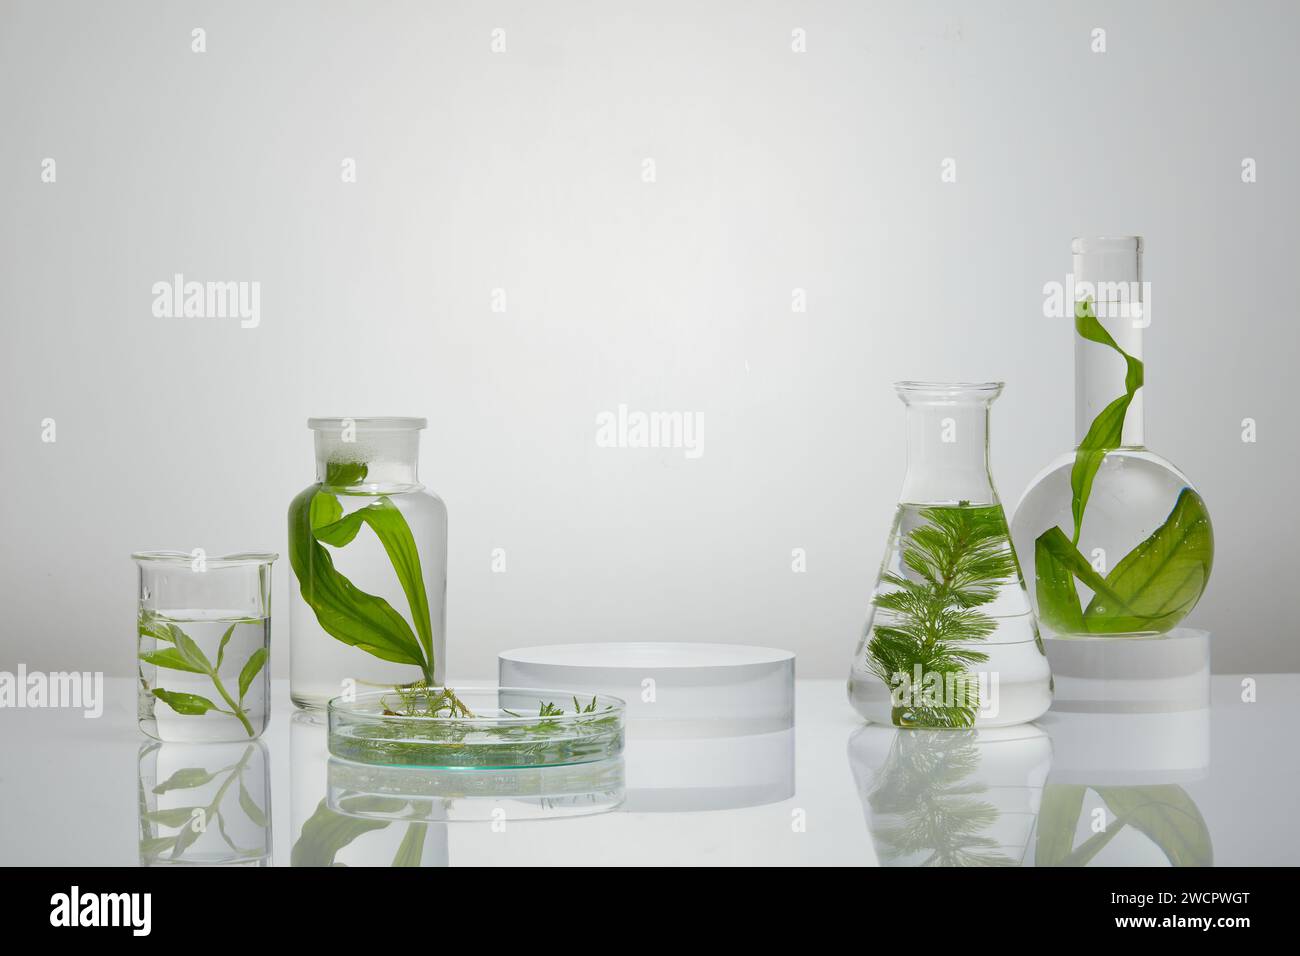 Laboratory glassware with fresh seaweed inside arranged on mirror table with a round podium. Seaweed helps smoothing out fine lines with its anti-agin Stock Photo